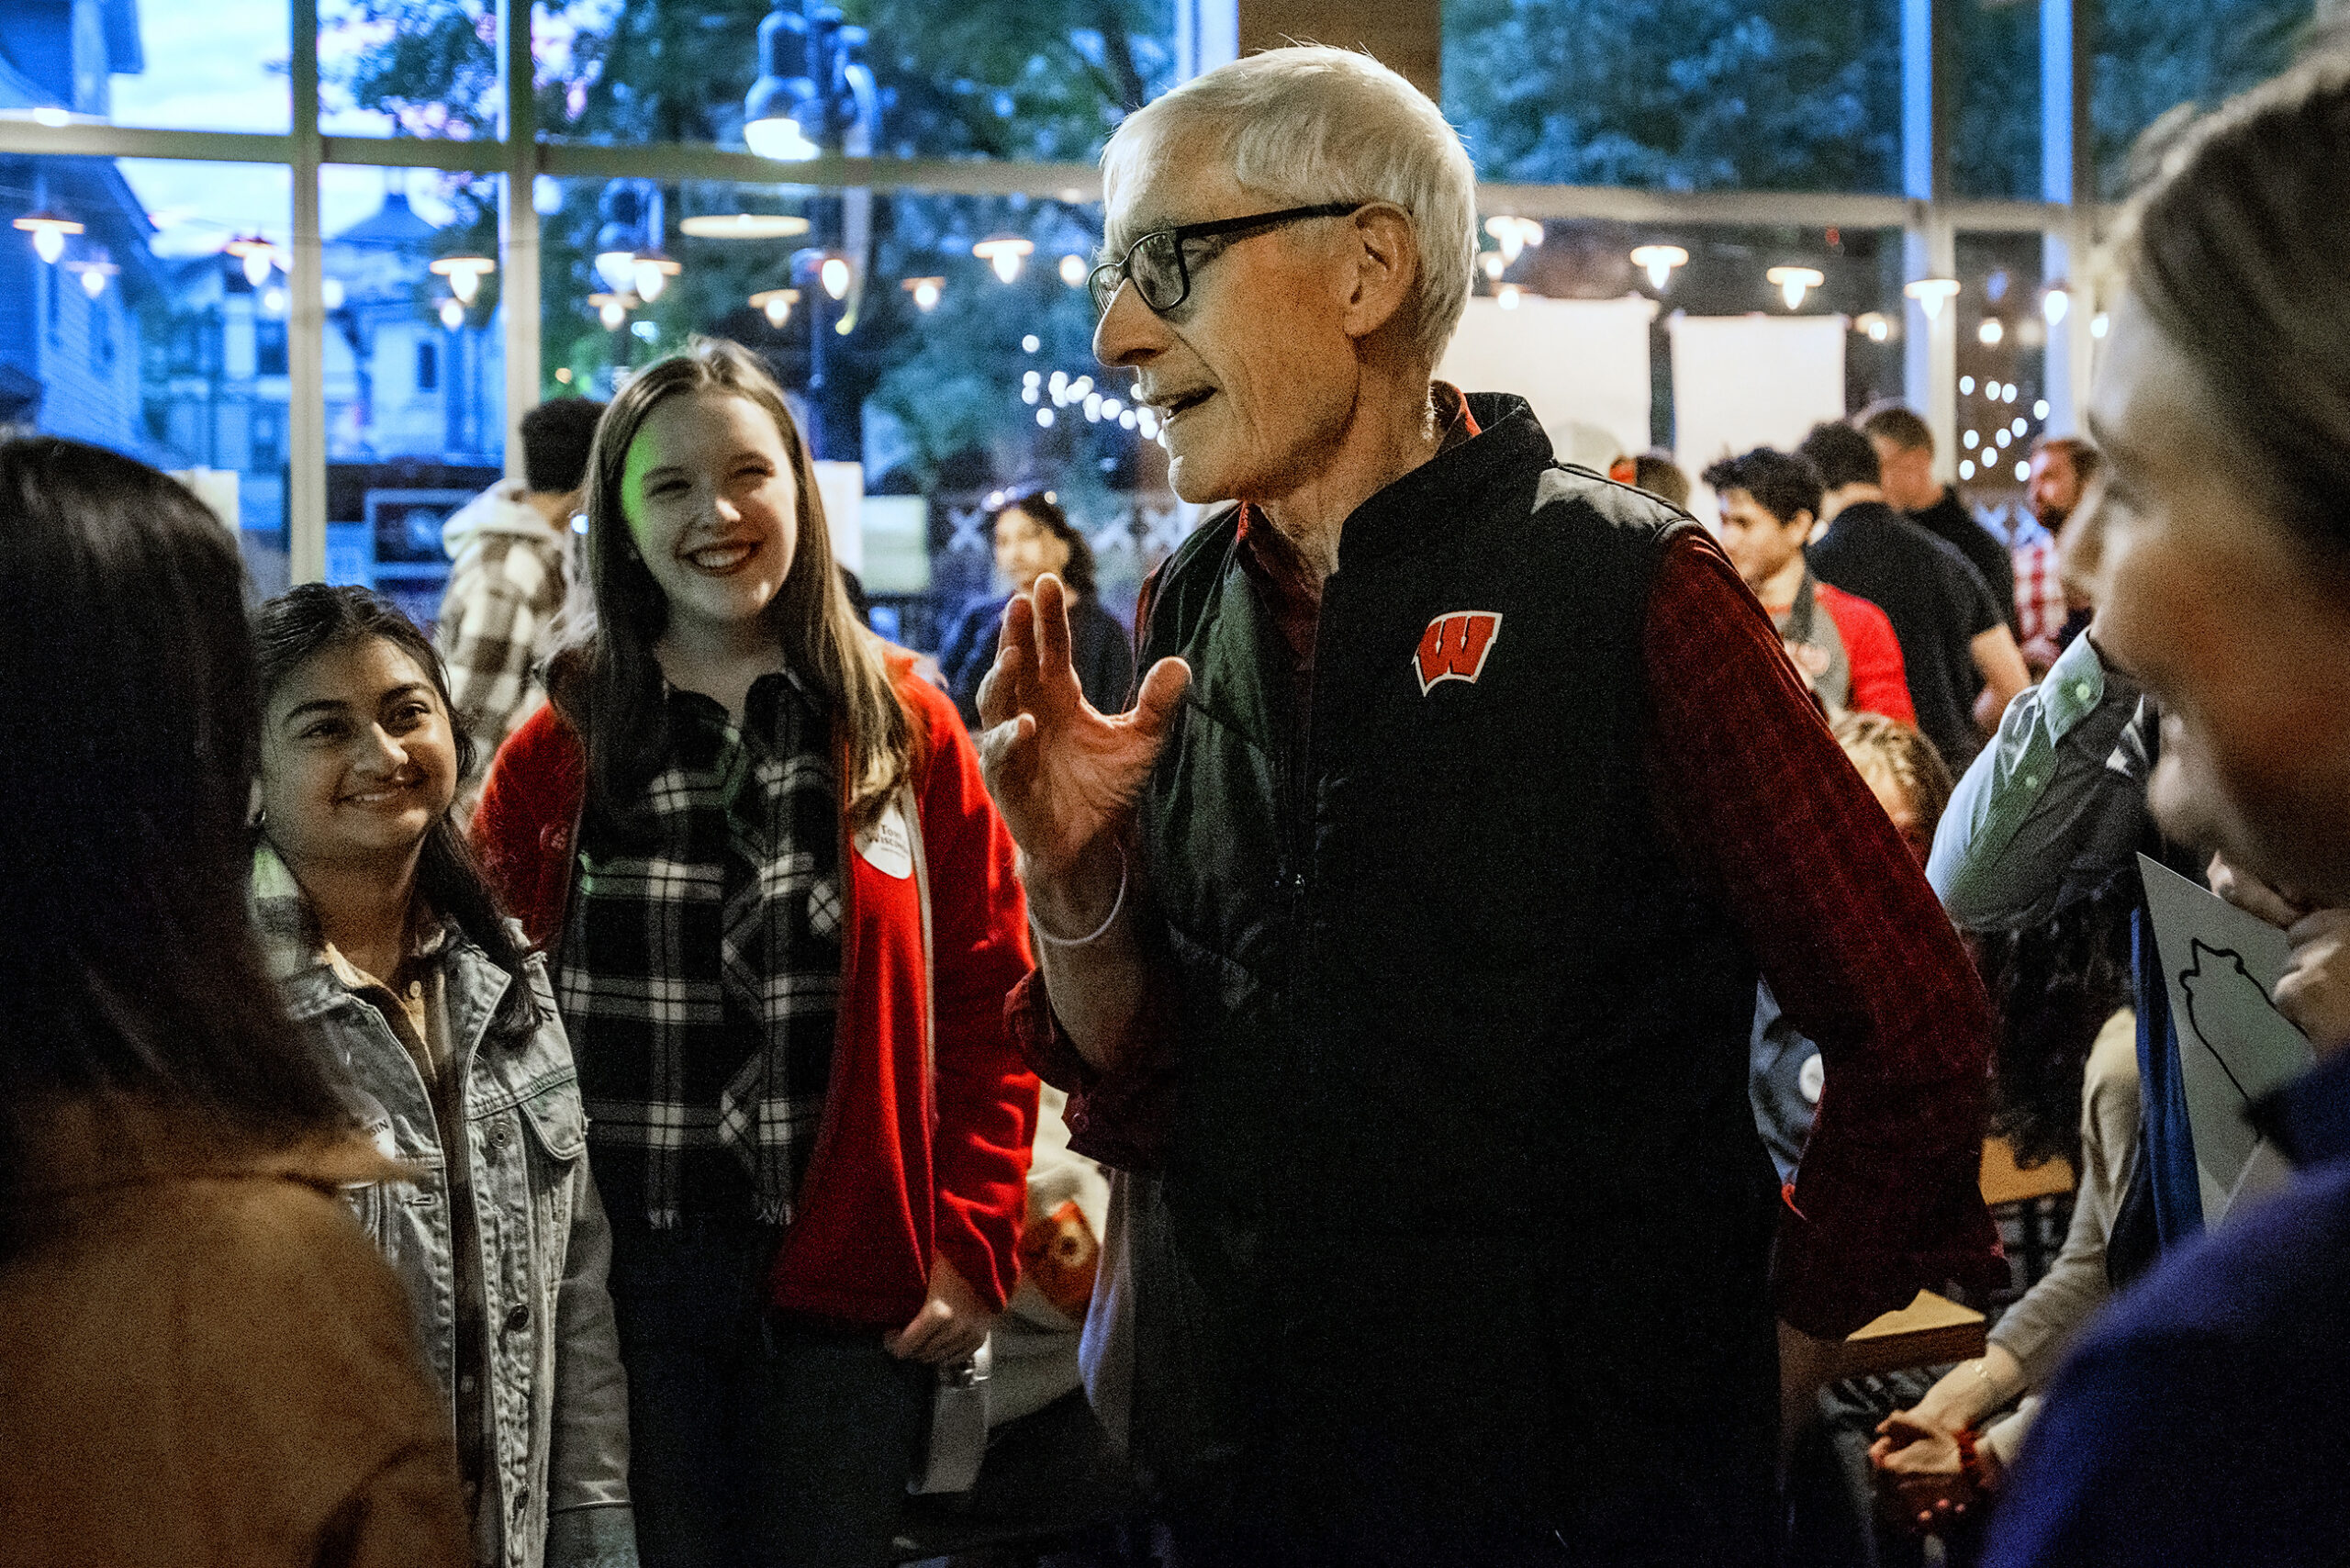 Gov. Tony Evers speaks to UW-Madison students who attended an event for his campaign.